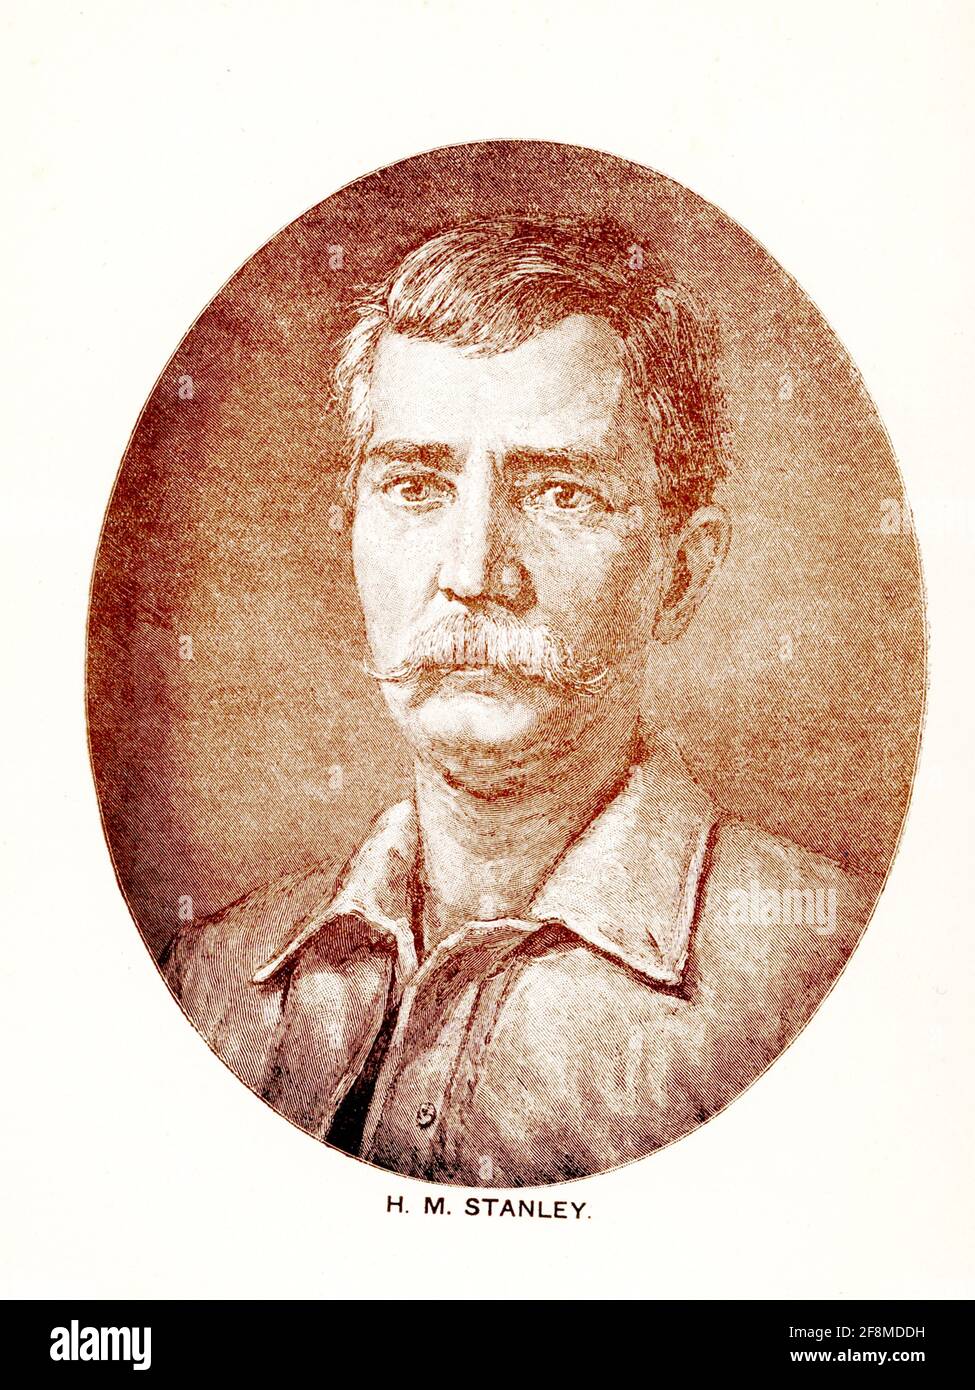 David Livingstone (1813-1873) was a Scottish missionary and explorer in Africa. He discovered Victoria Falls in 1855. When there was no news from him for some time, British explorer Henry Morton Stanley (1841–1904) was sent to find him. He did so on November 10, 1871, at the small village of Ujiji in Tanzania,  near Lake Tanganyika. Stock Photo